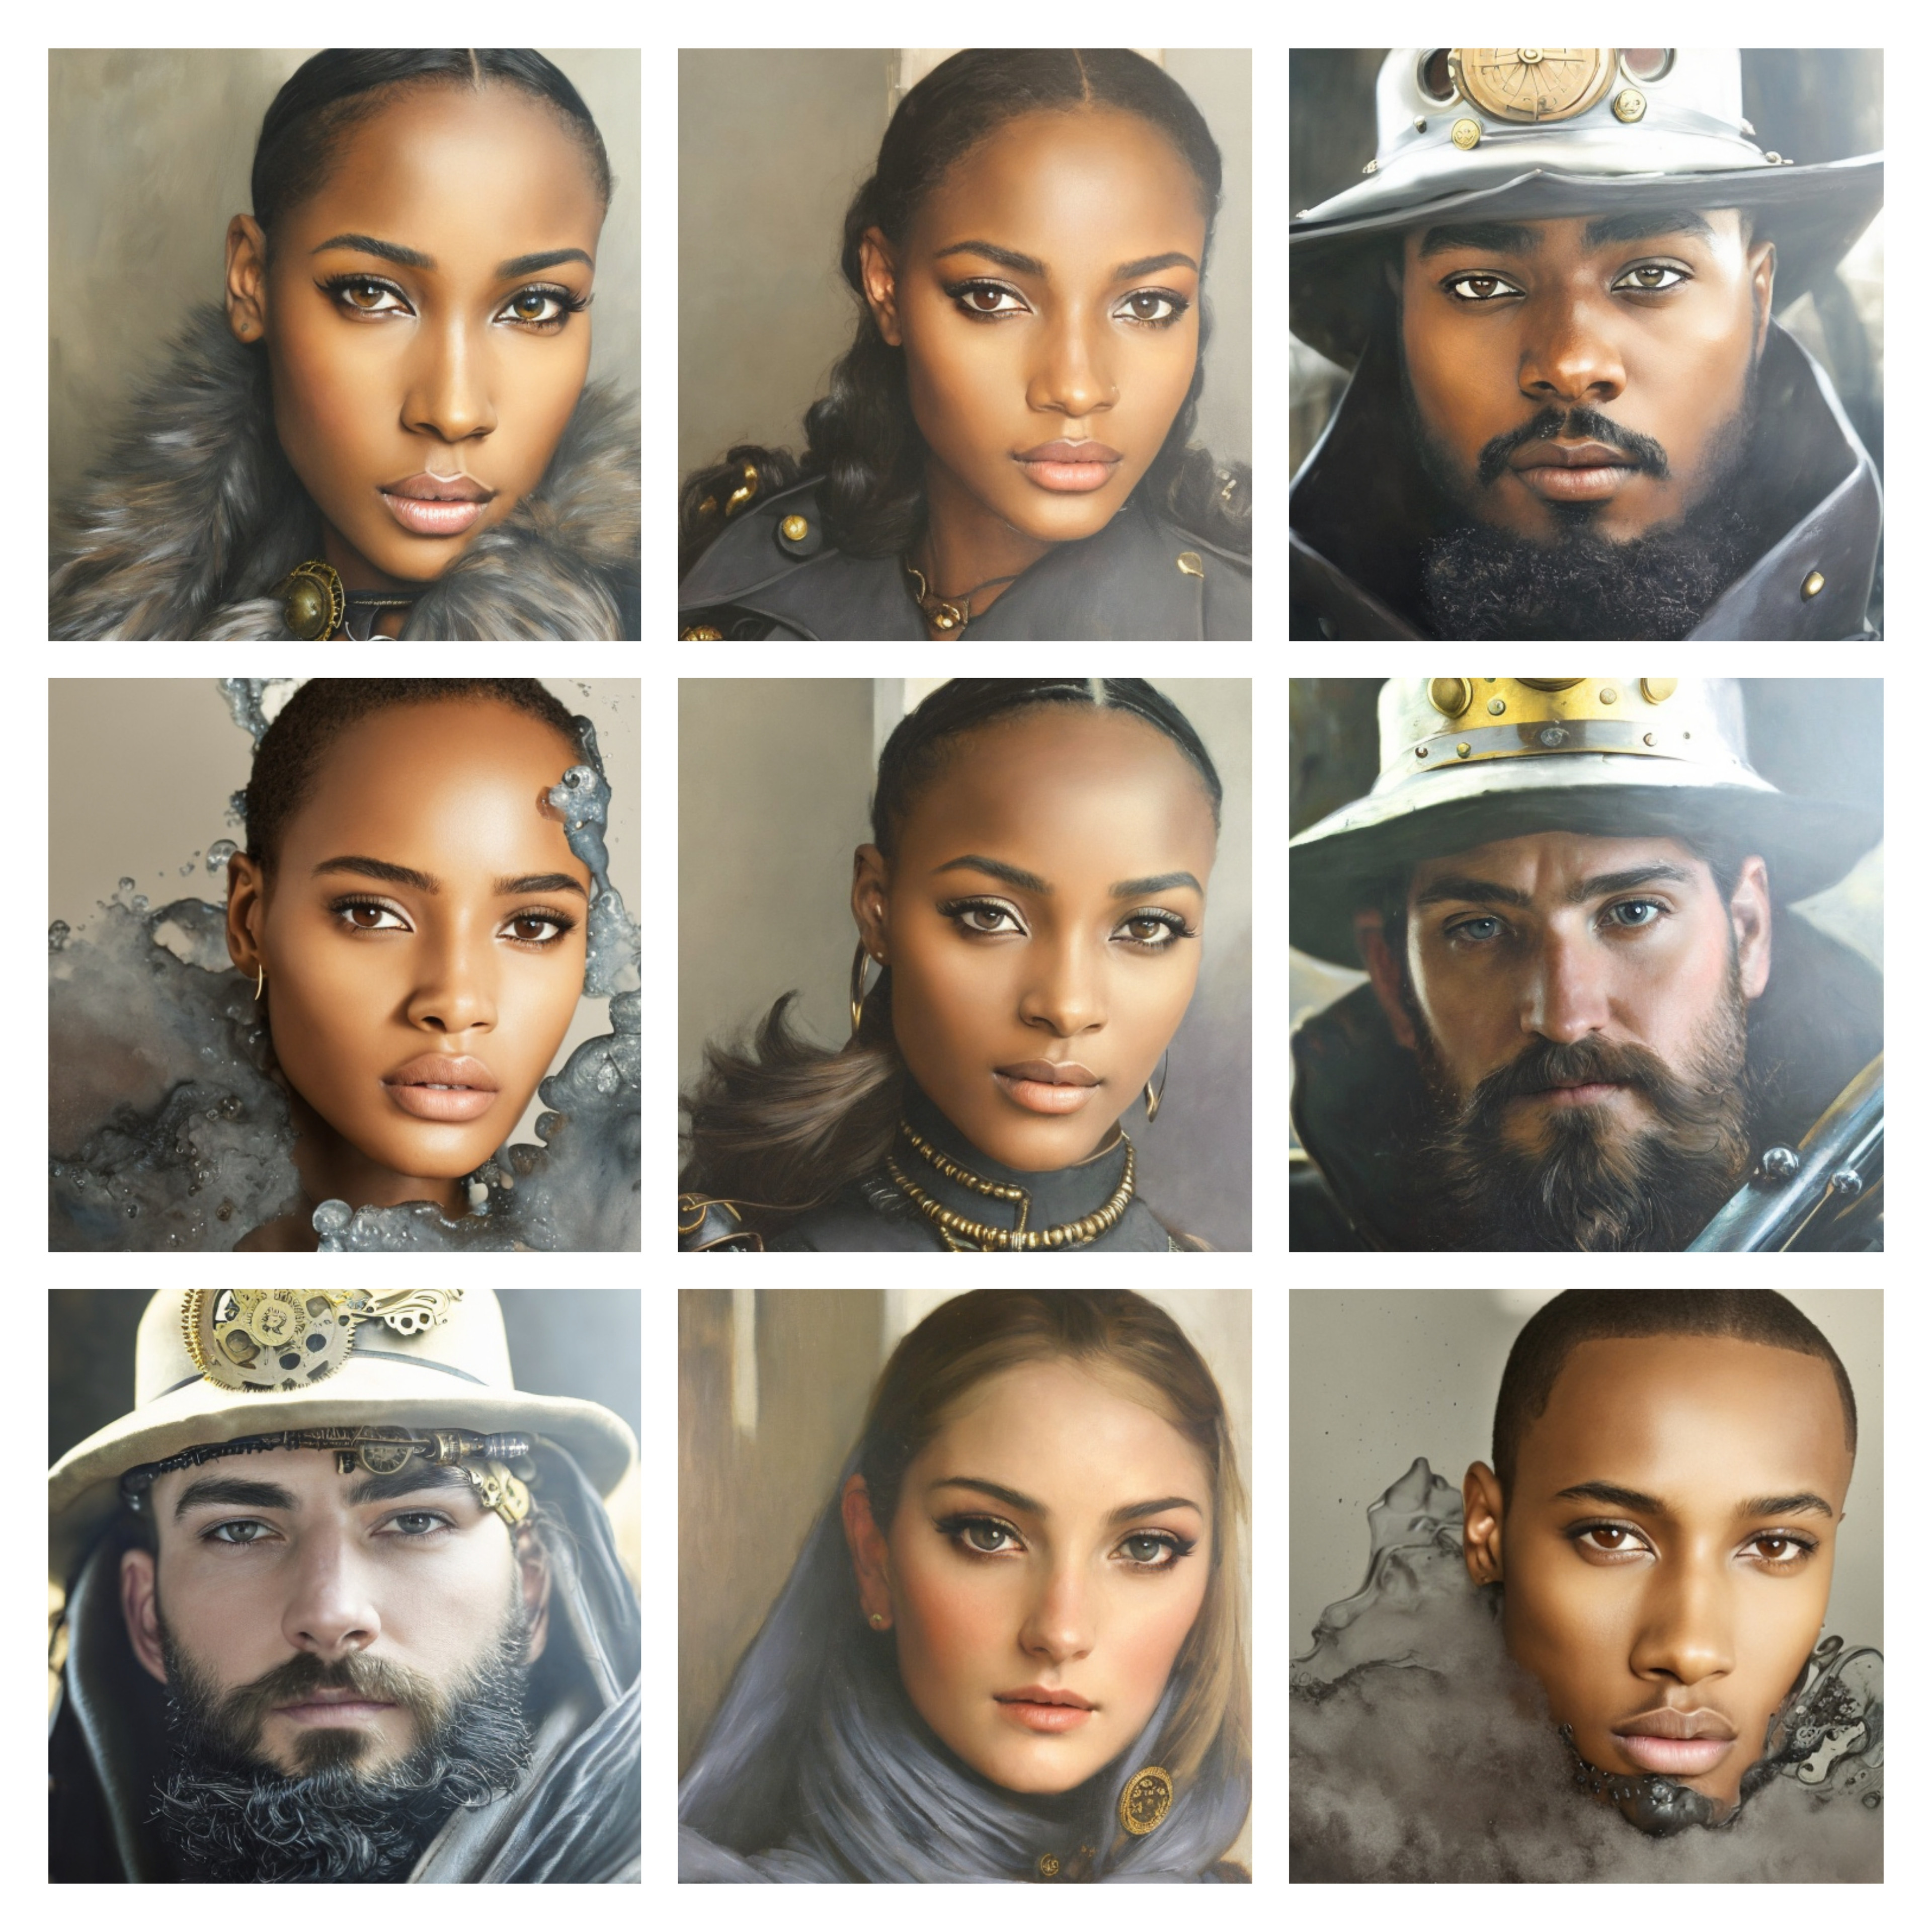 This is a collage of different portraits I created. All but three of the characters in the portraits are modeled after my own facial features. The other three were, with the hat and beard were modeled after my barber.